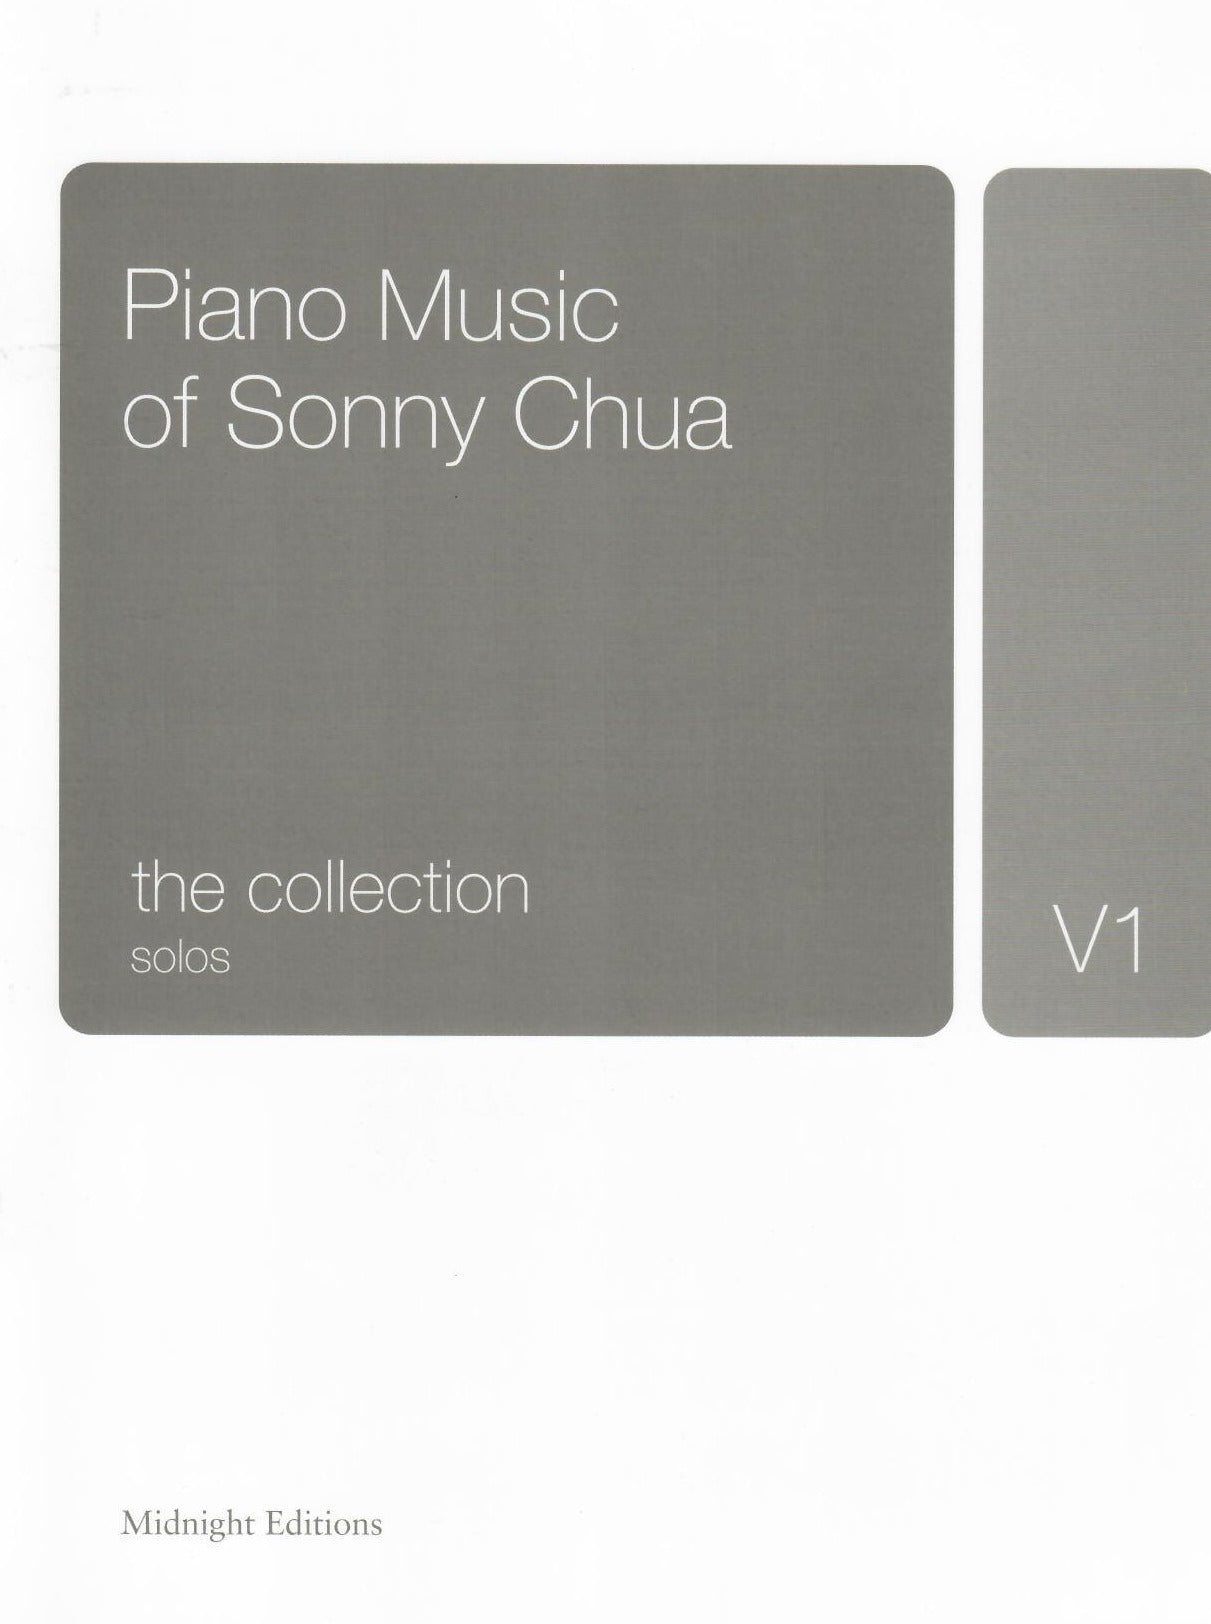 Piano Music of Sonny Chua: The Collection, Volume 1